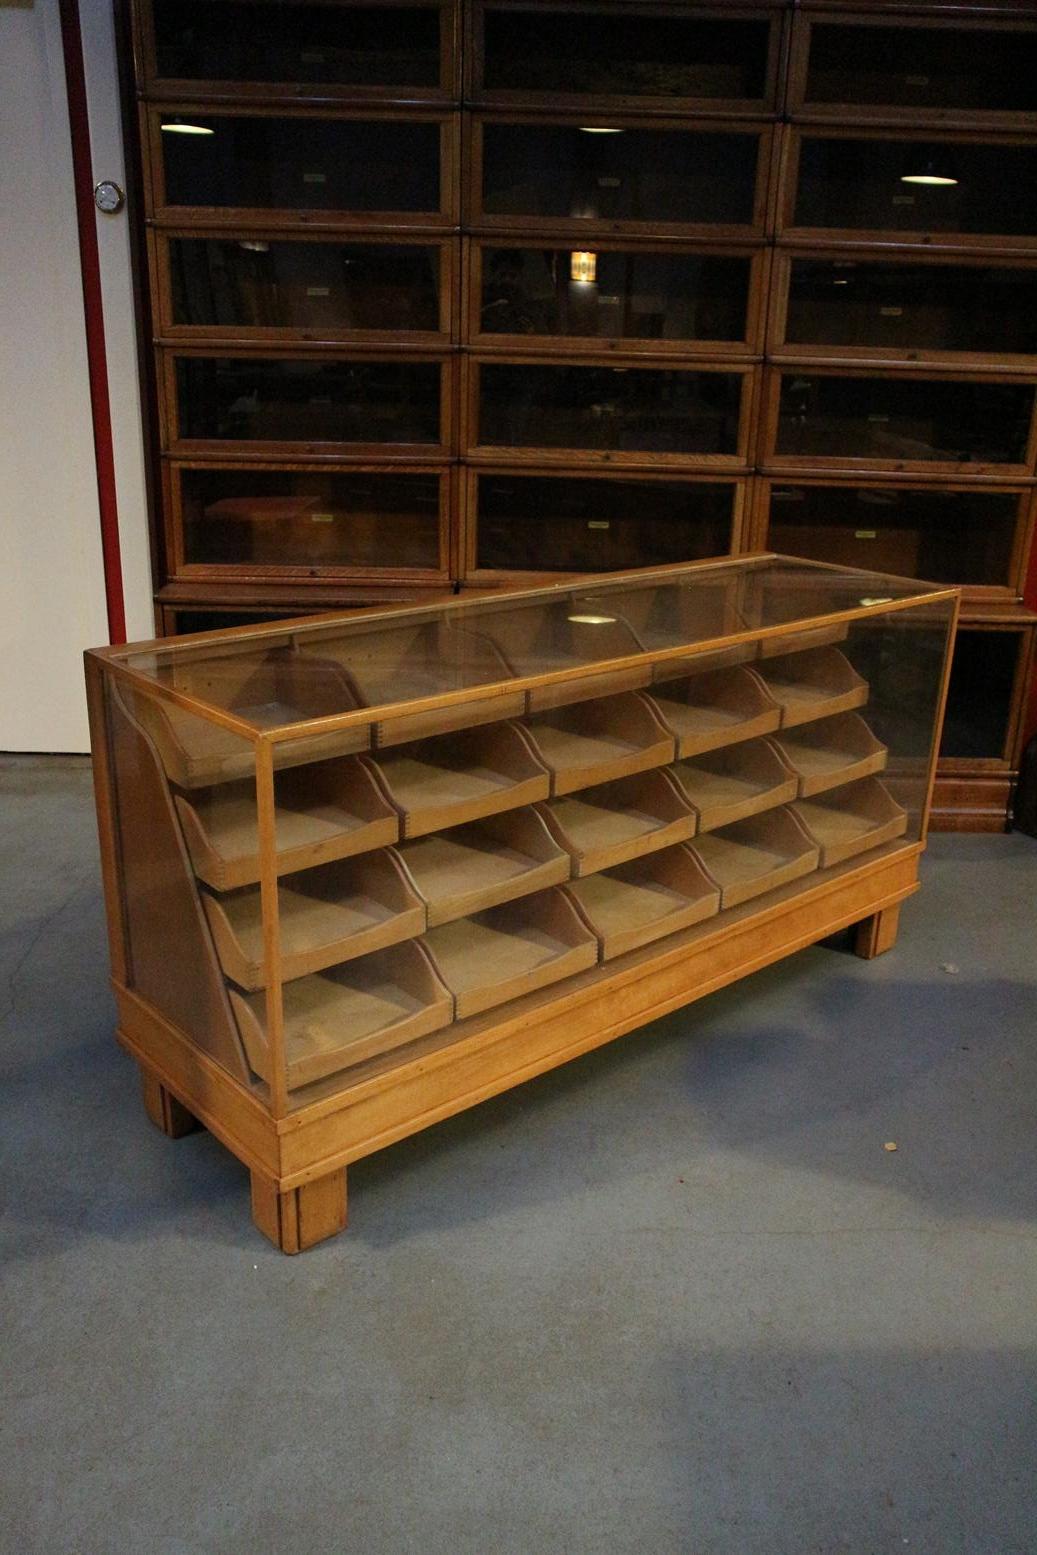 British Old Shop Counter Display Case with 20 Drawers